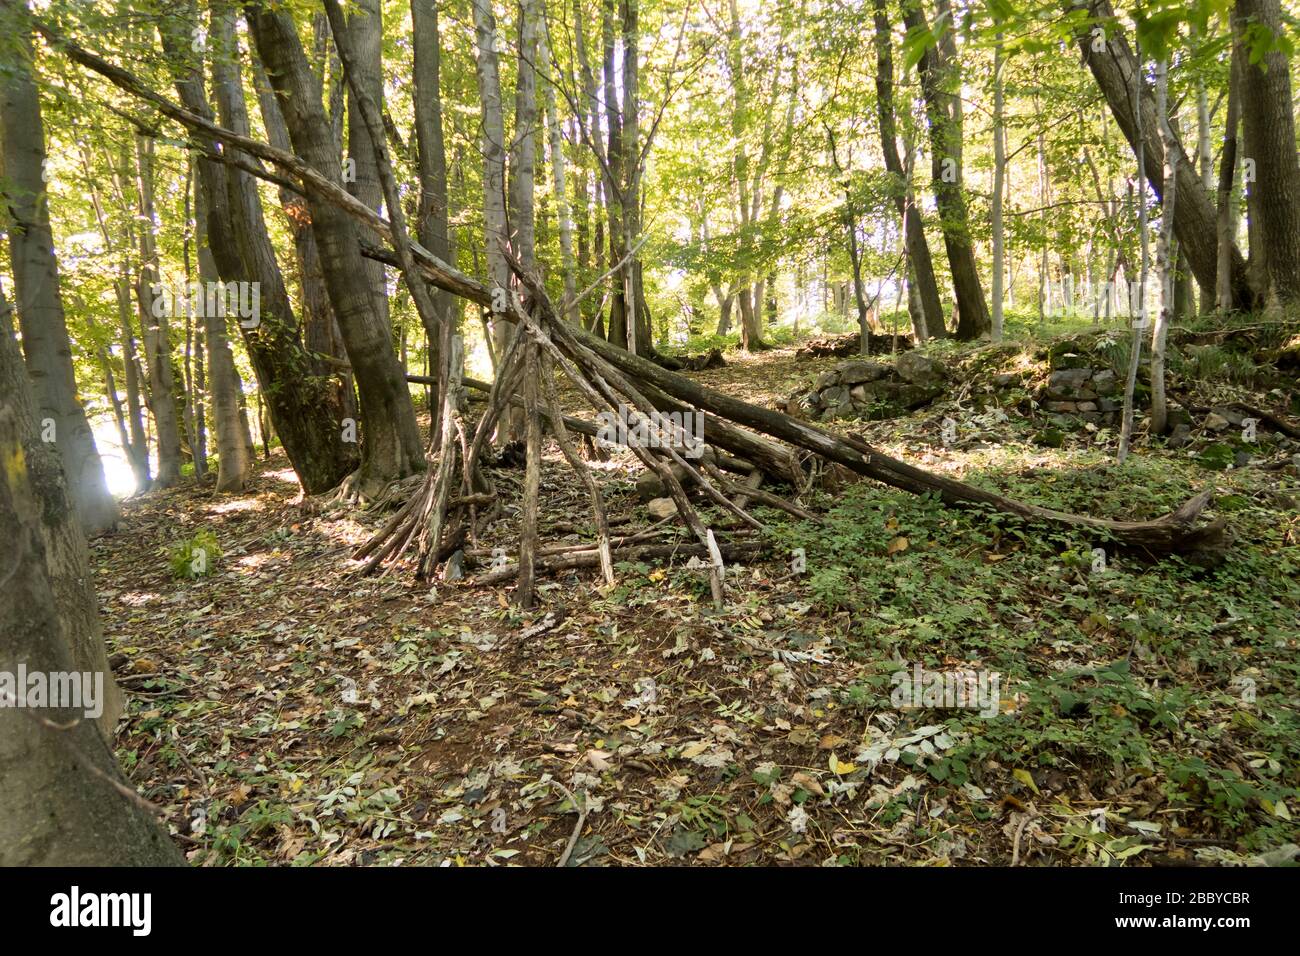 A makeshift shelter in a forest in Italy Stock Photo